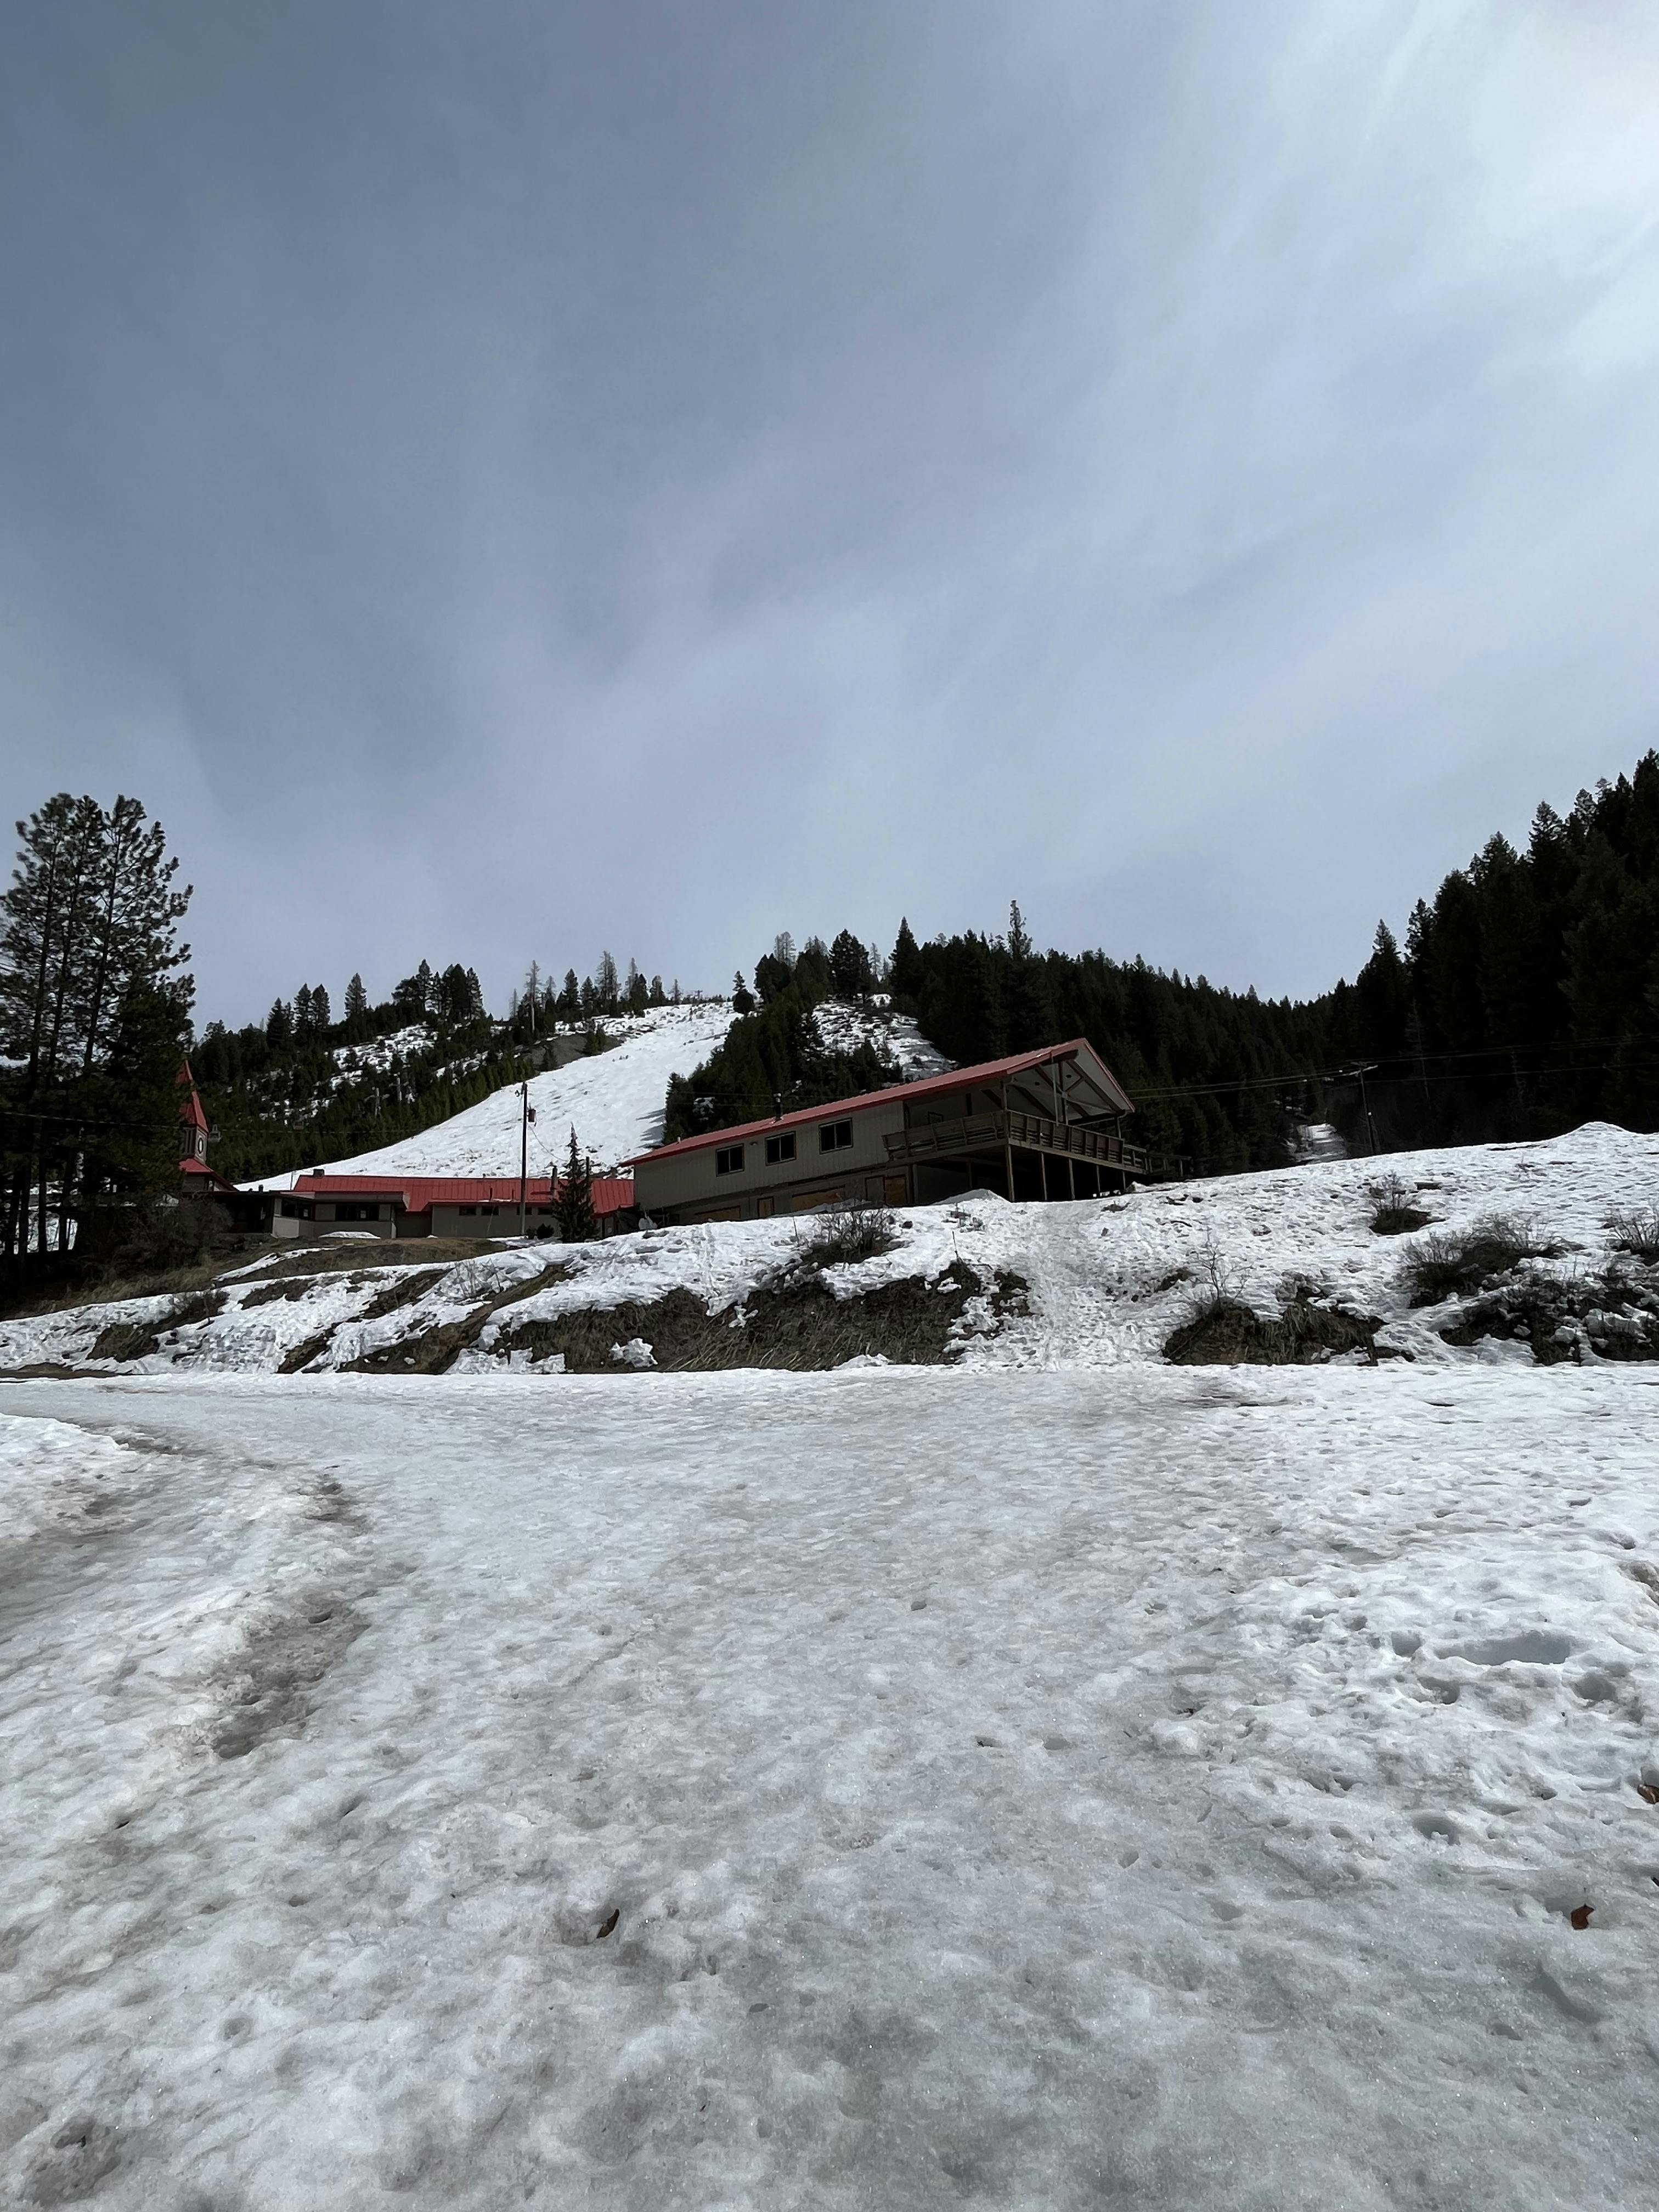 The two lodge buildings at Marshall Mountain, April 2023